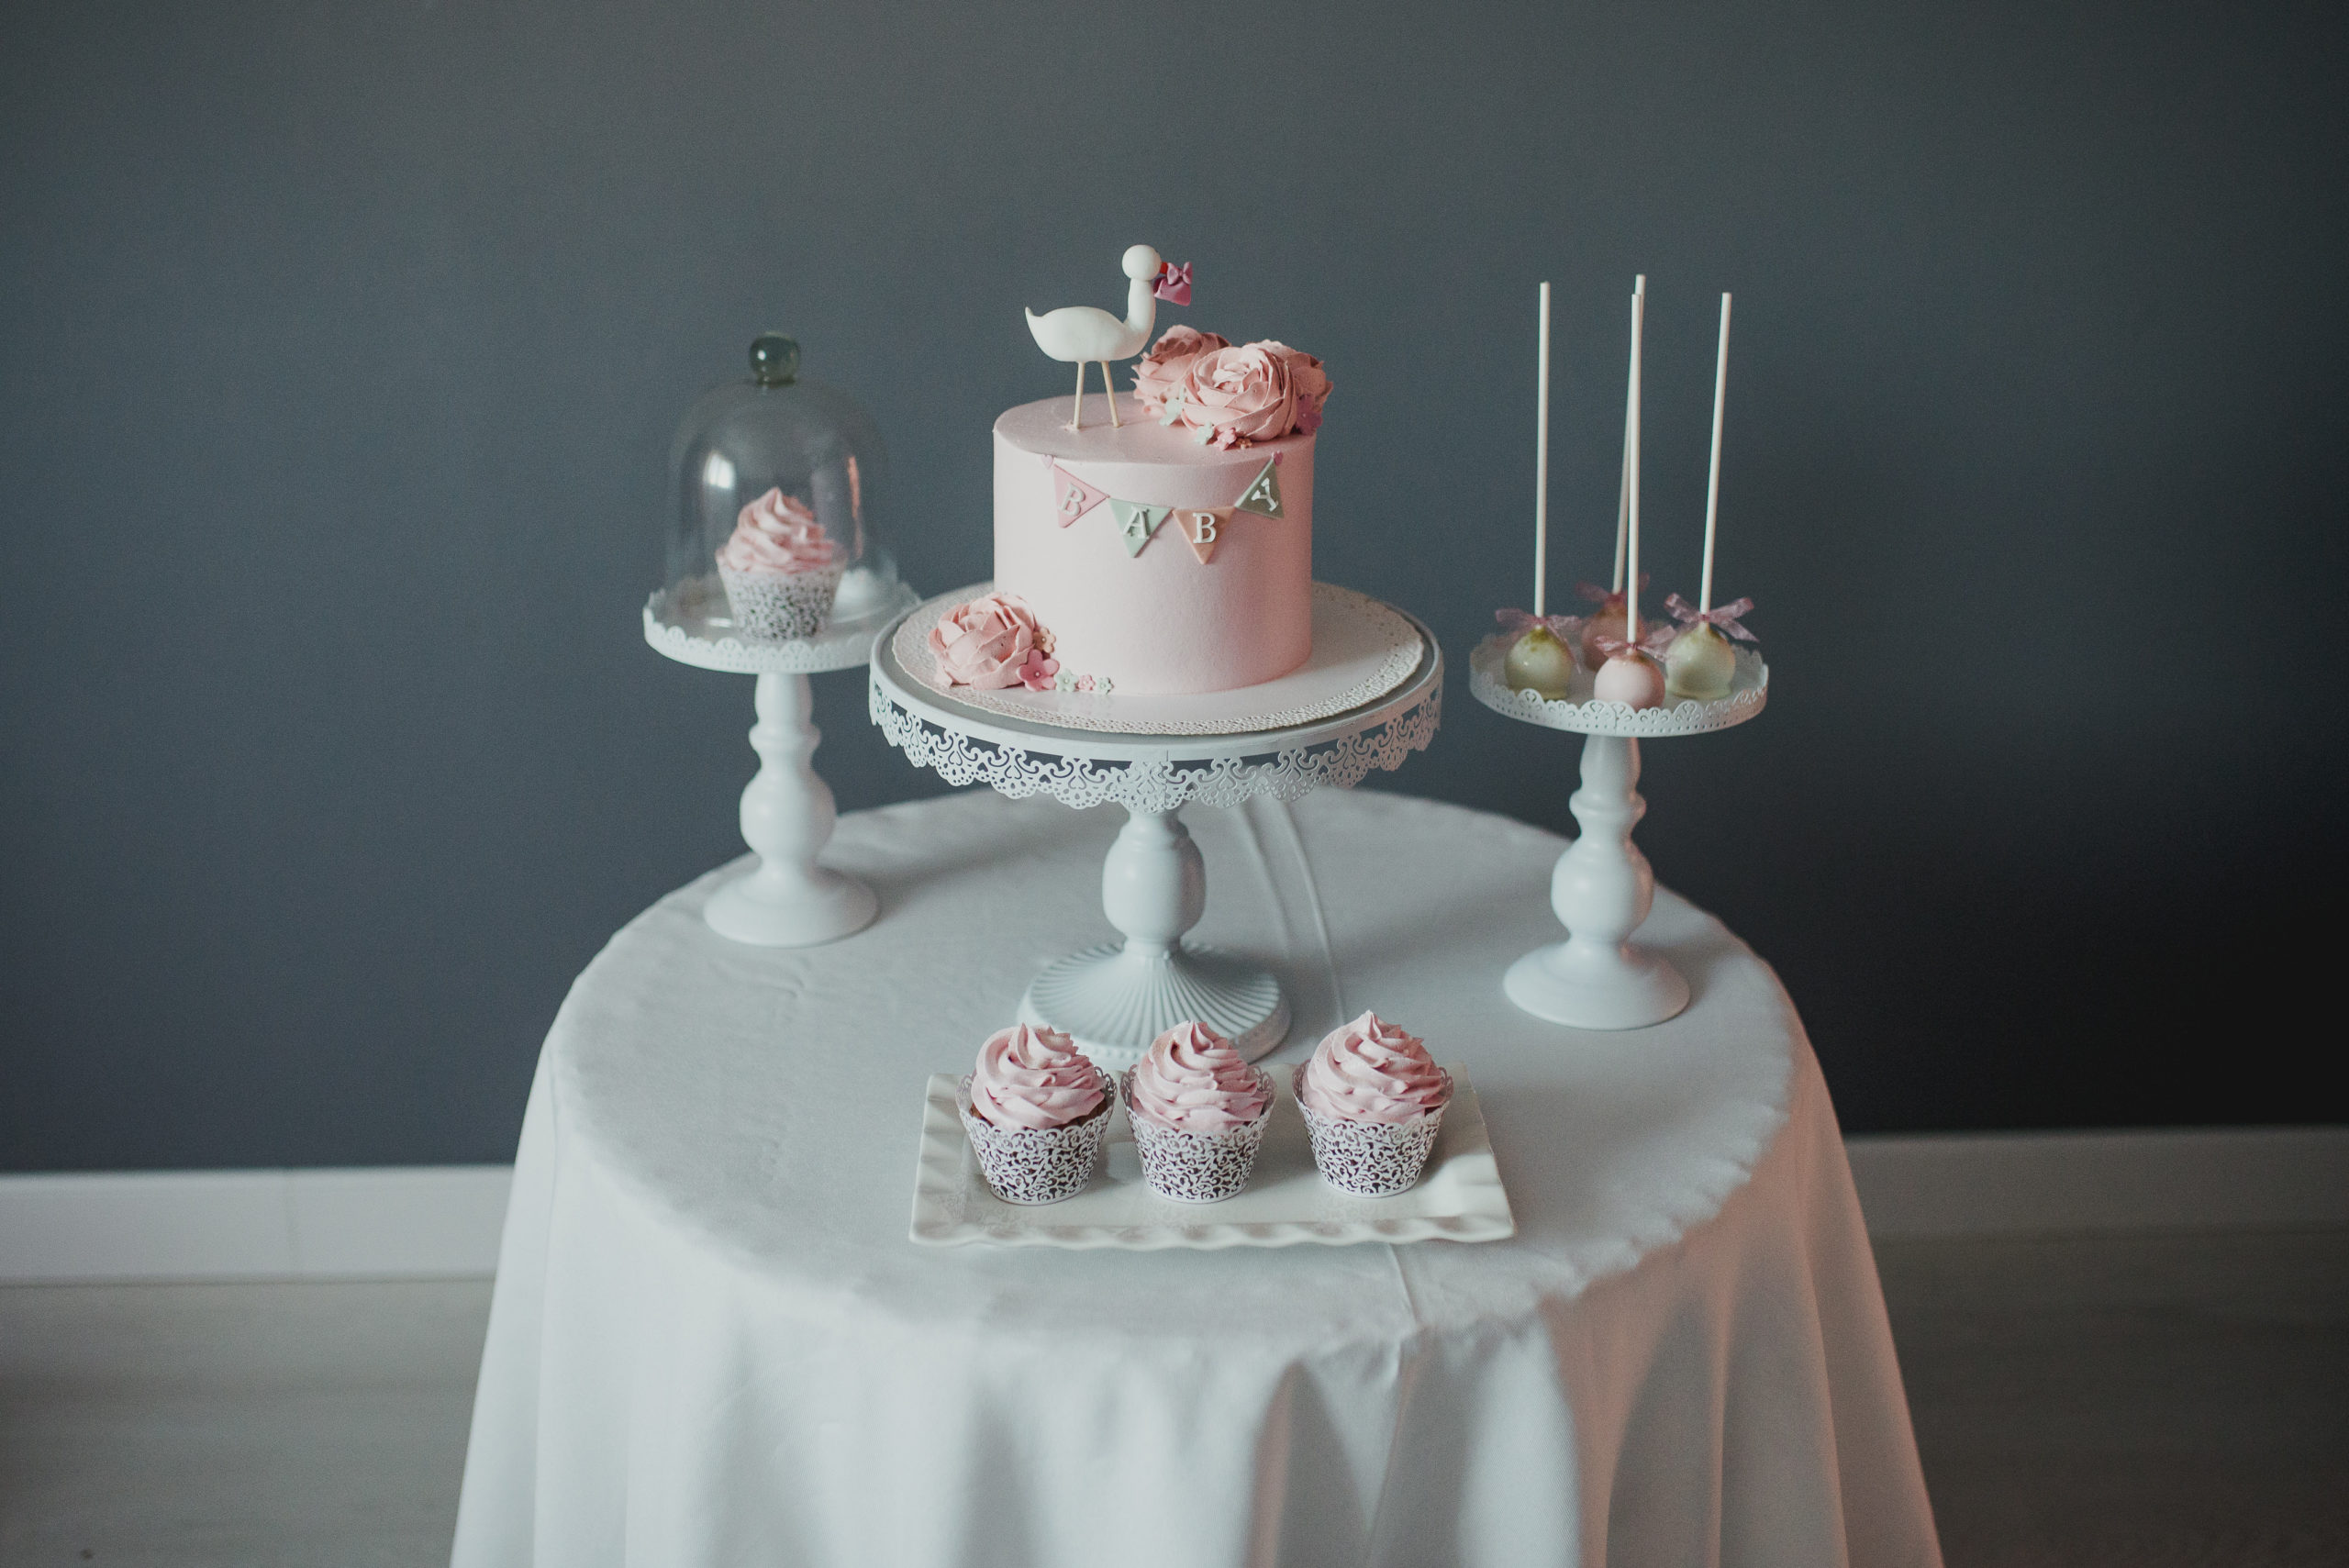 Table of baby shower cakes, cupcakes, and other baby shower dessert ideas.